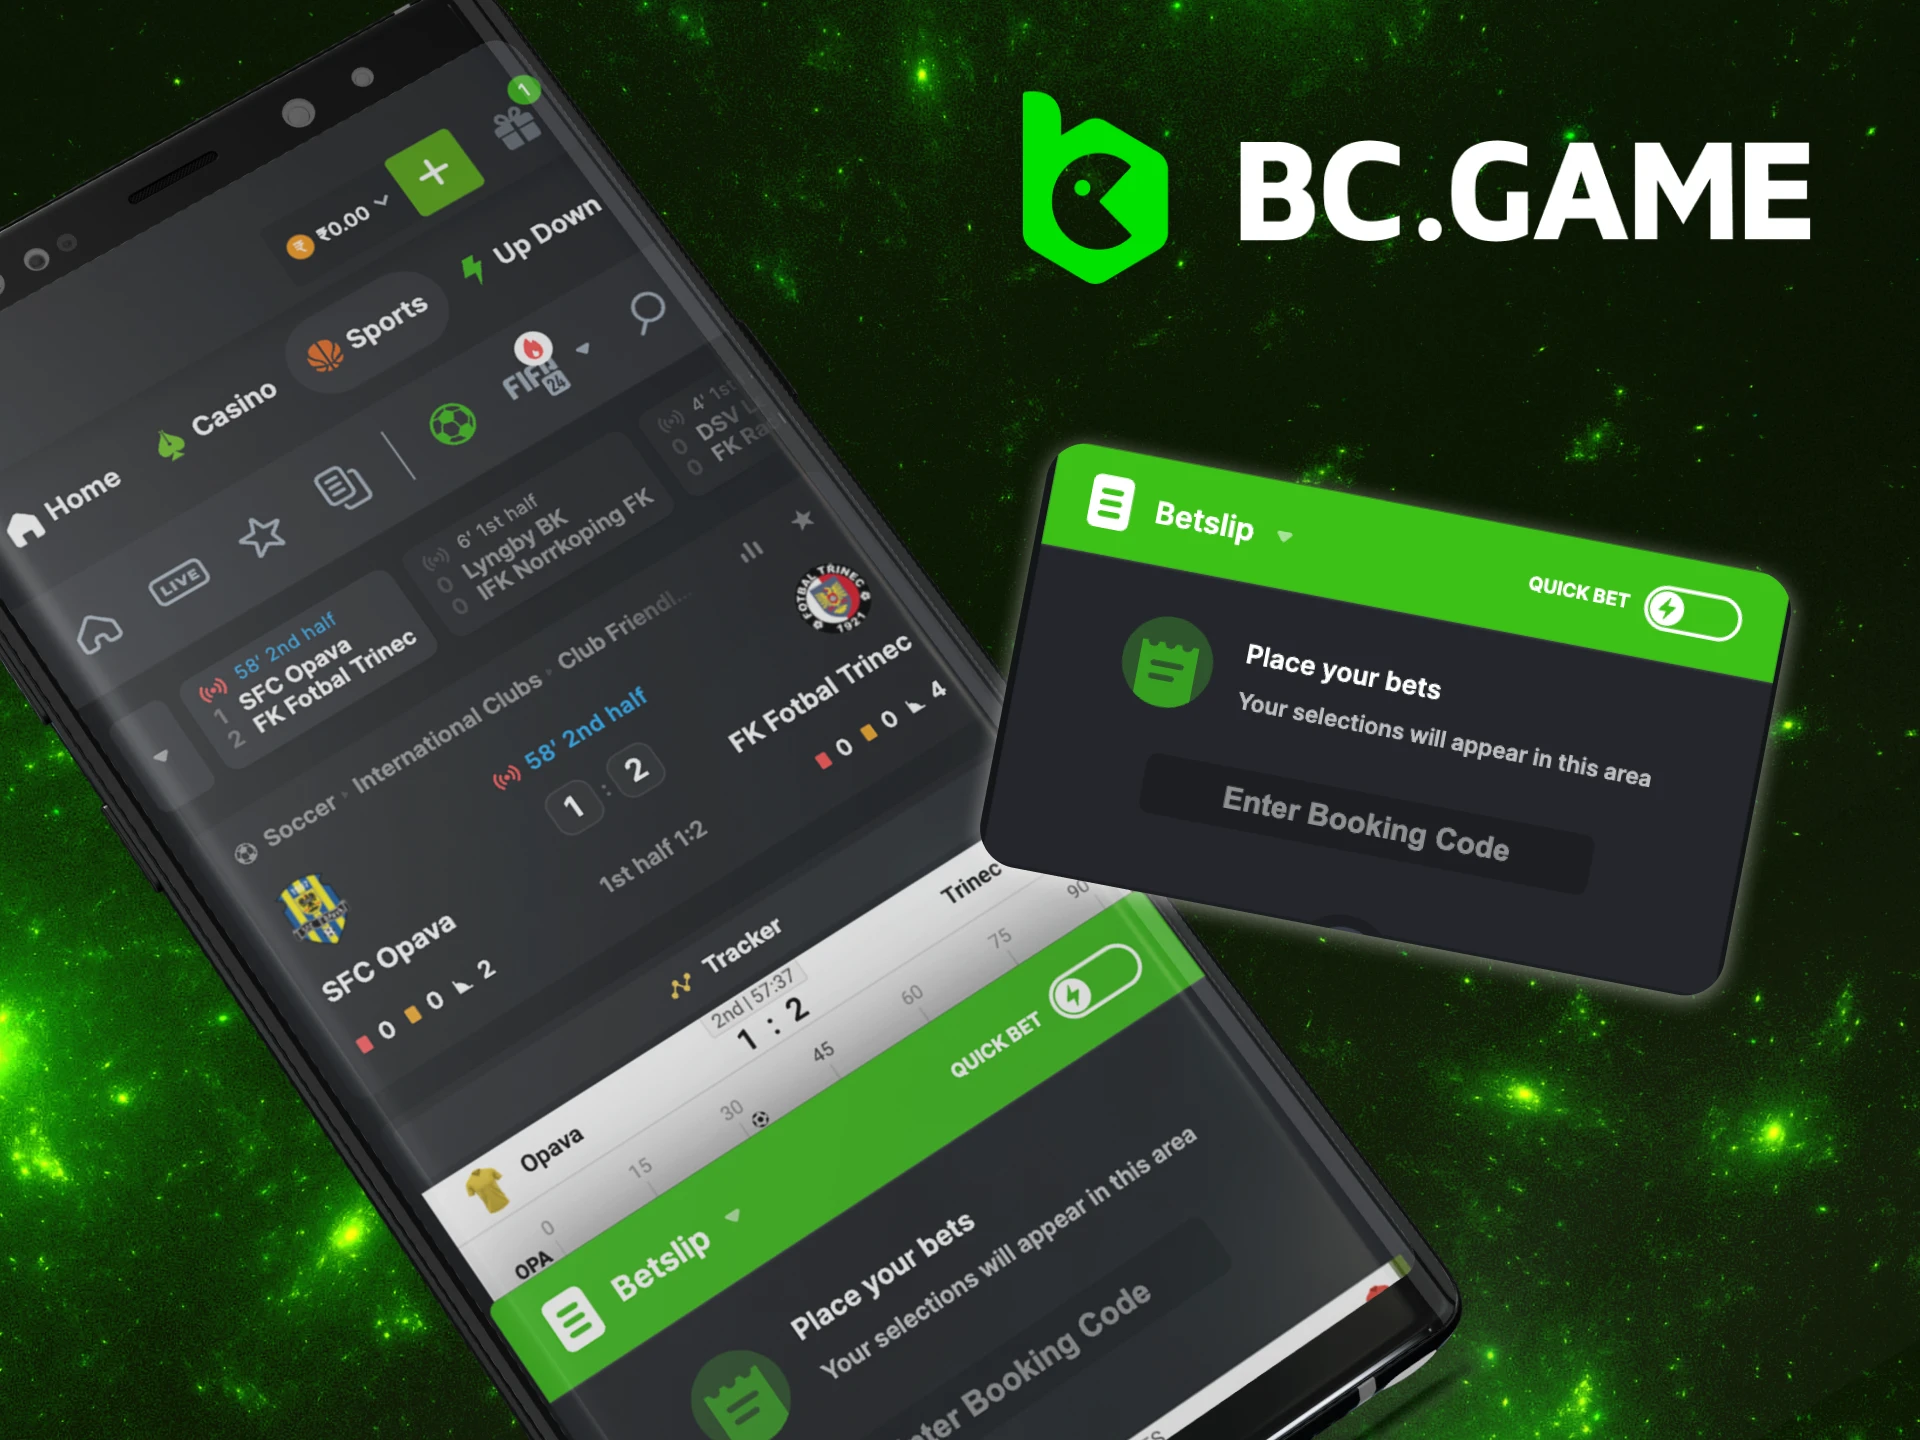 What are the betting options in the BC Game app.